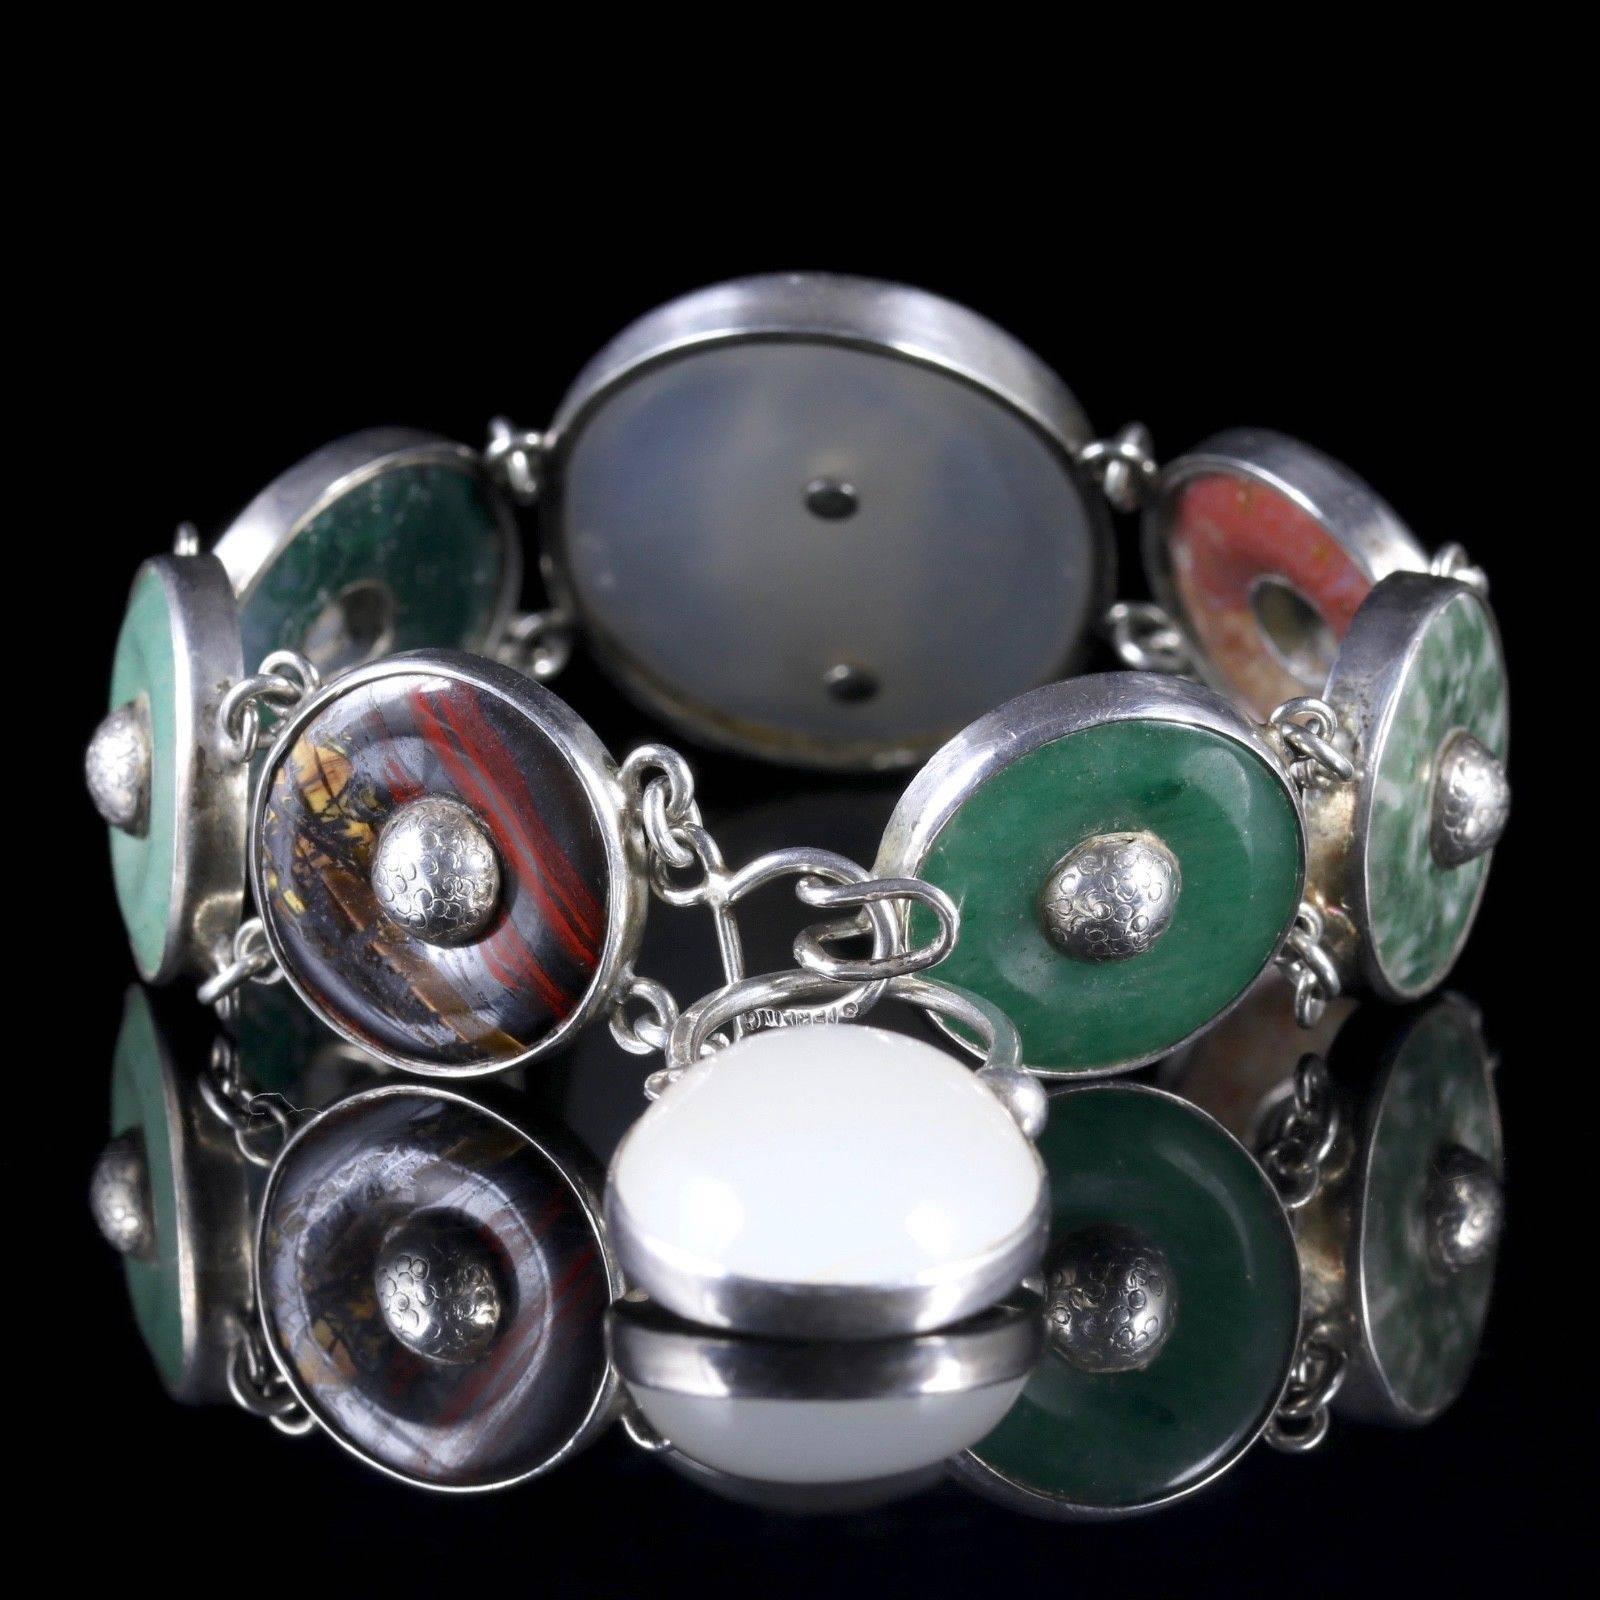 For more details please click continue reading down below...

This has to be one of the most unique Scottish bracelets we have ever exhibited. 

A beautiful antique Victorian Golfers bracelet which is Circa 1860.

Scottish jewellery was made popular